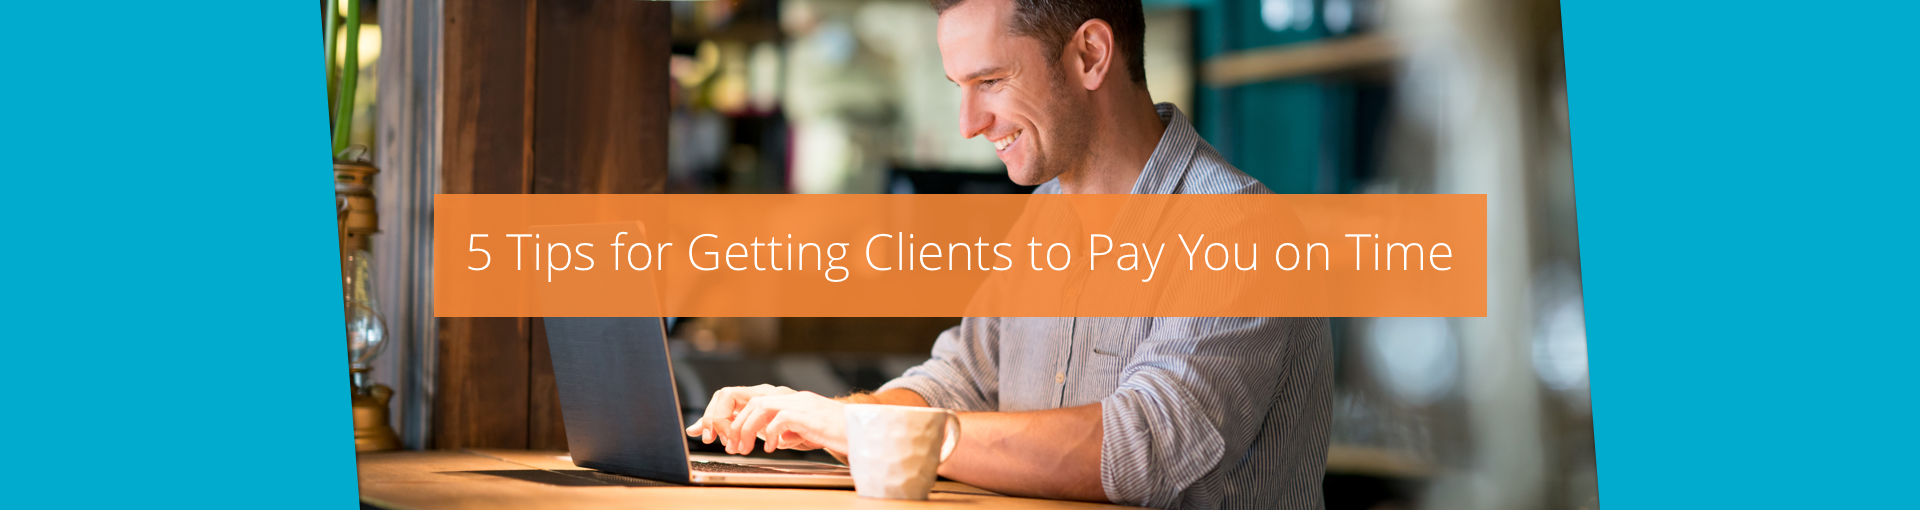 5 Tips for Getting Clients to Pay You on Time Featured Image